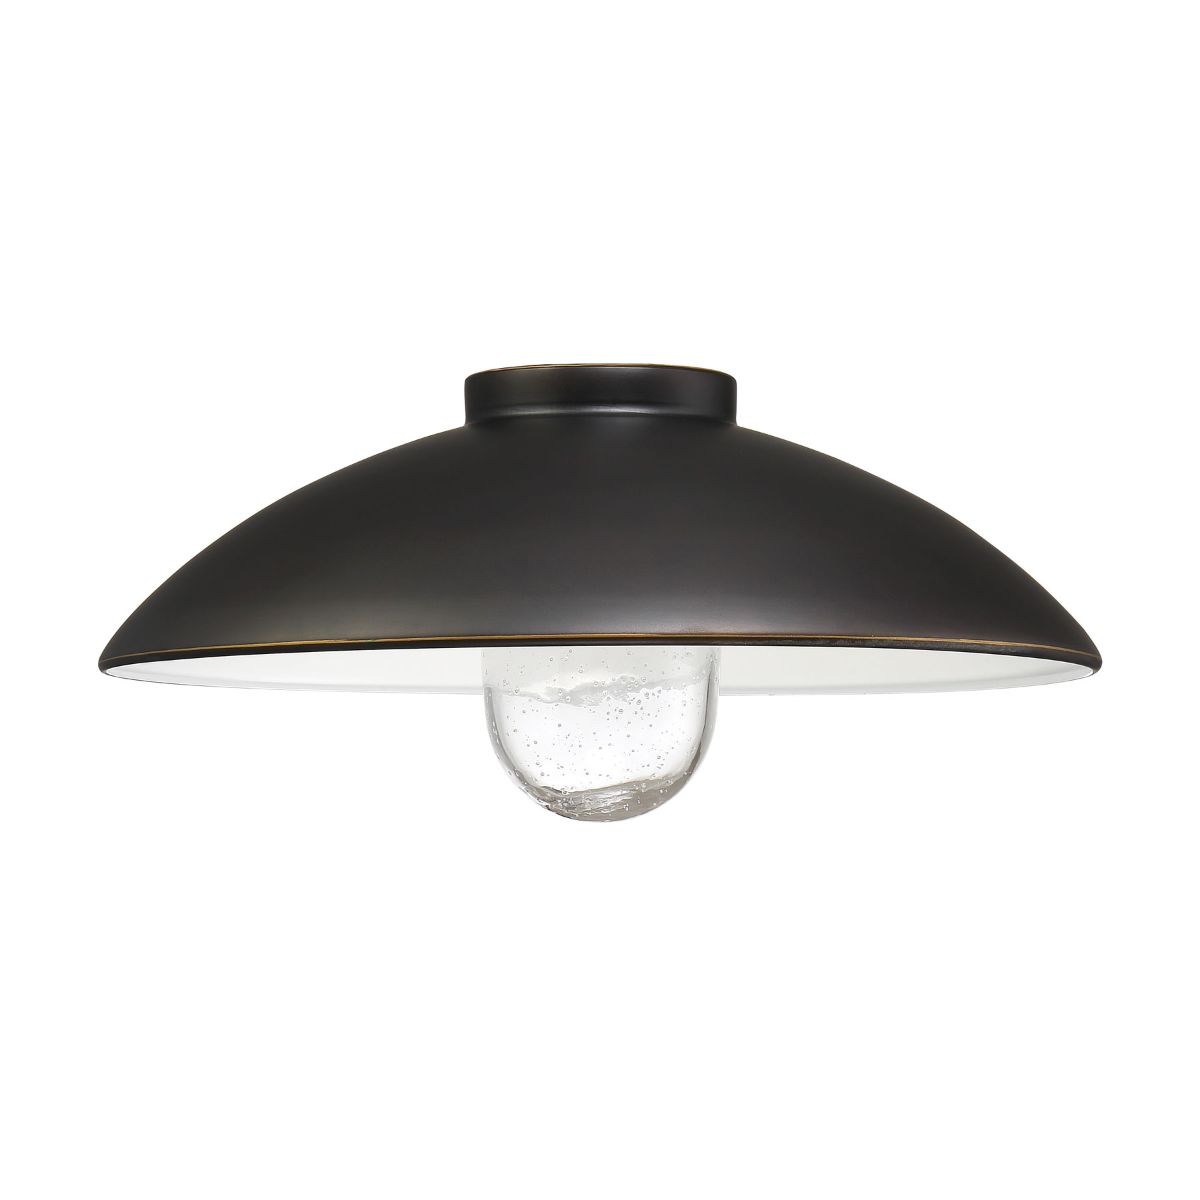 RLM 14 in. Path Light Shade Oil Rubbed Bronze finish